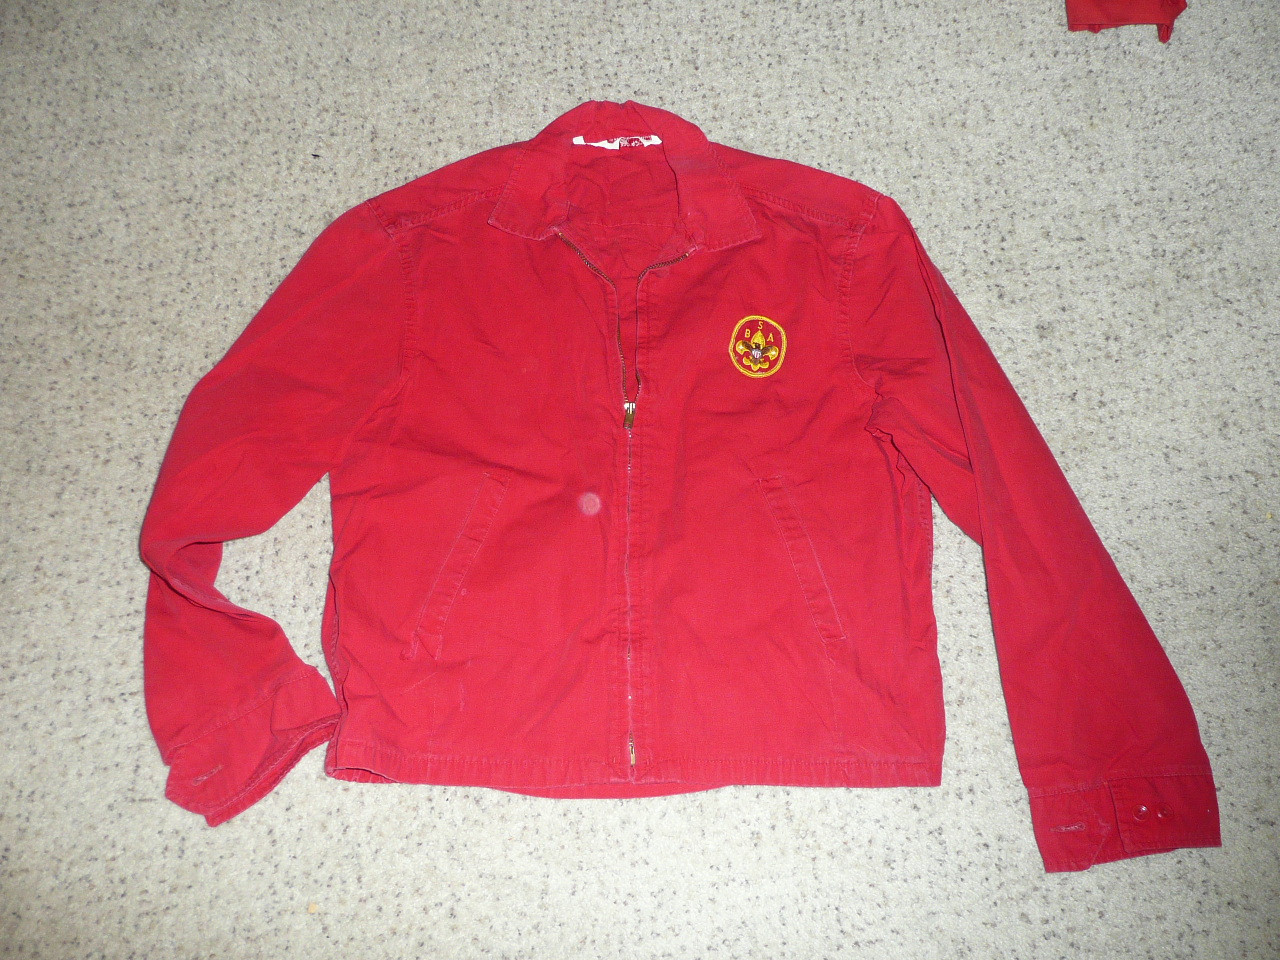 Official Boy Scouts of America Red Cotton Jacket  -  Medium, used, #FB9